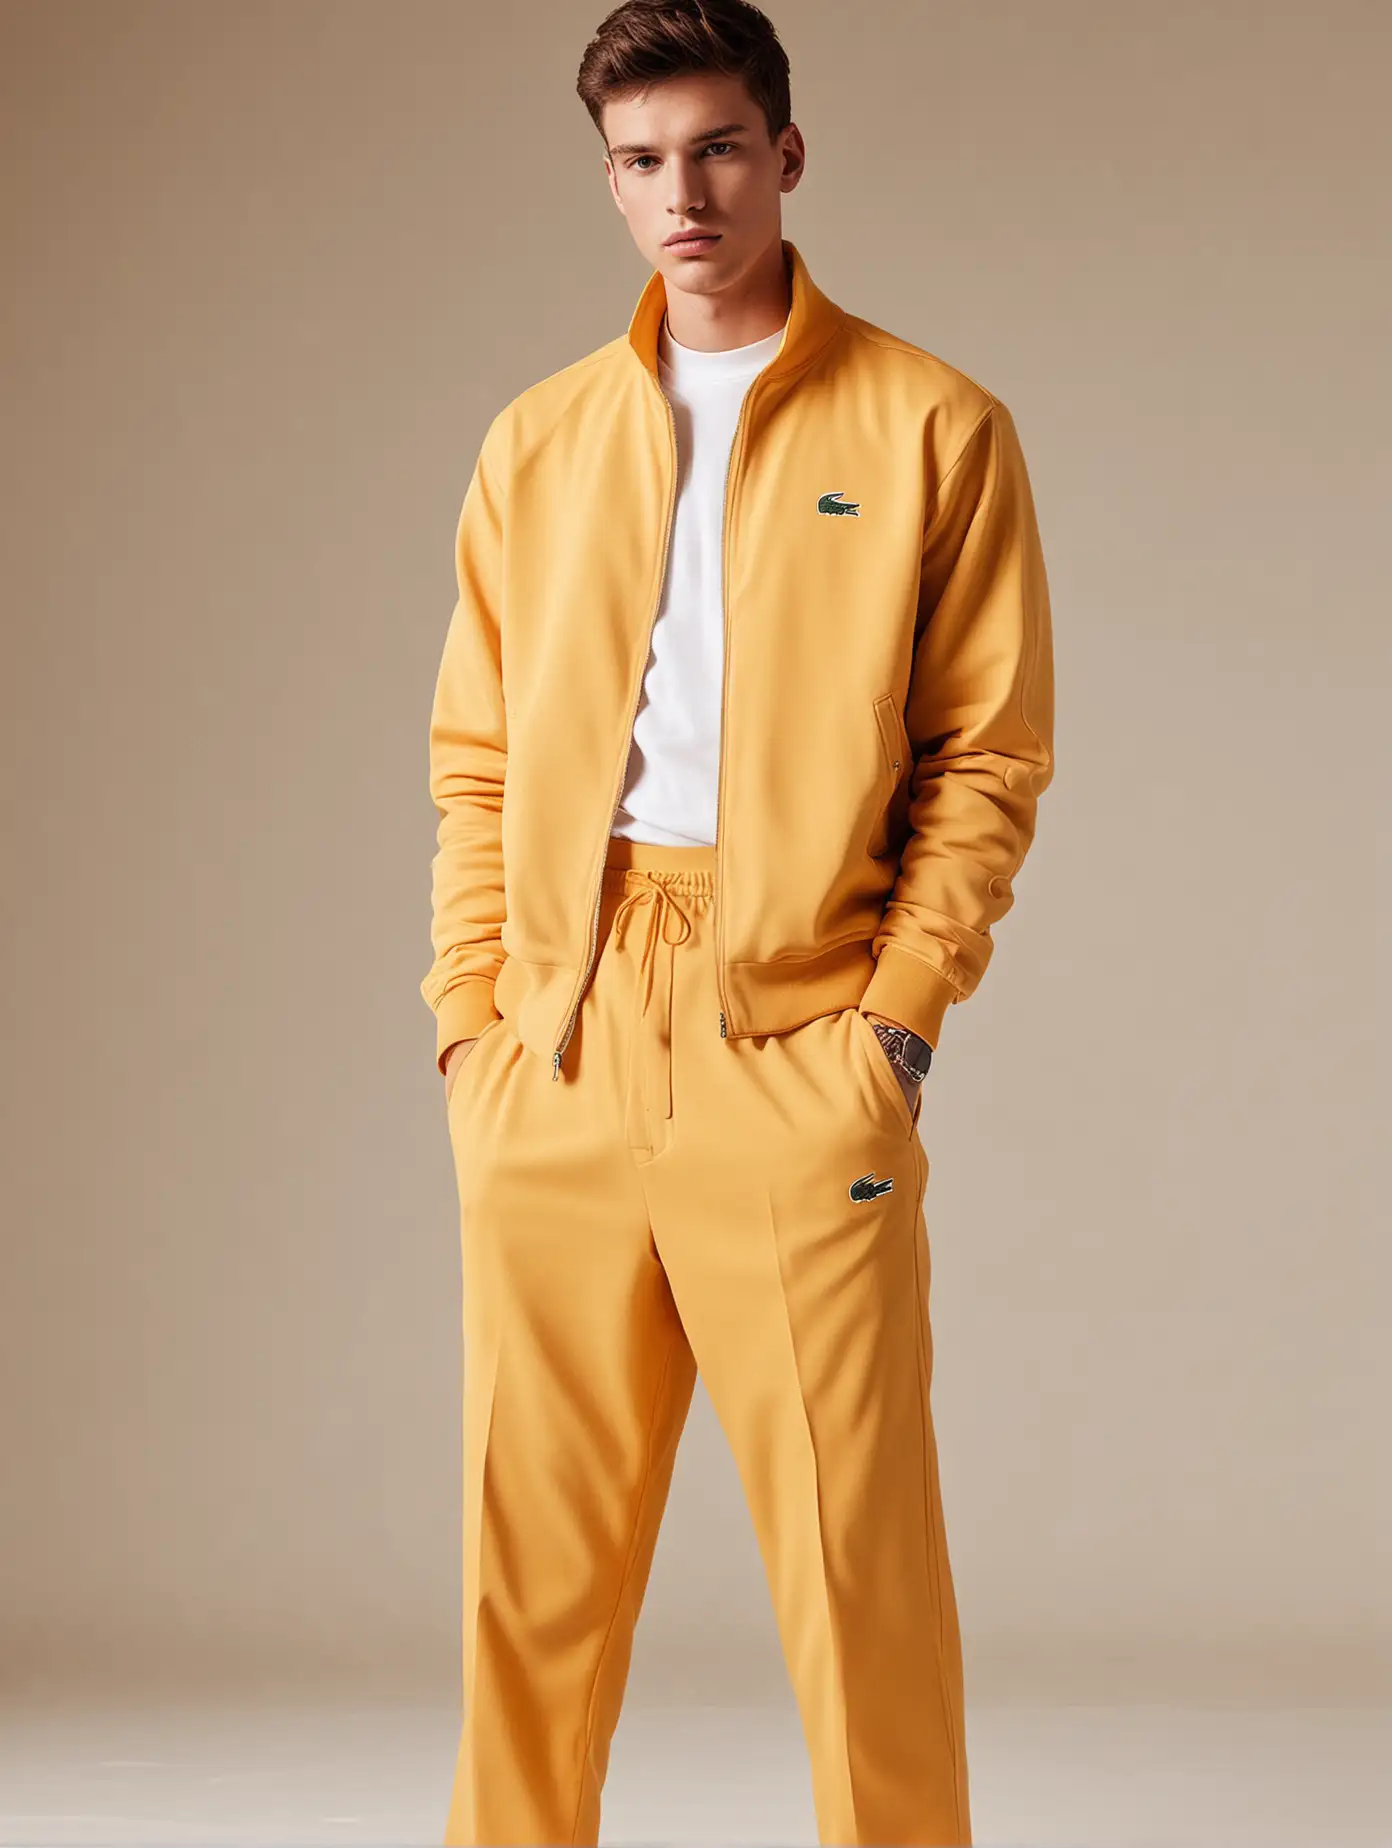 Fashion Model in Stylish Lacoste Tracksuit Poses in Expansive SandyColored Studio